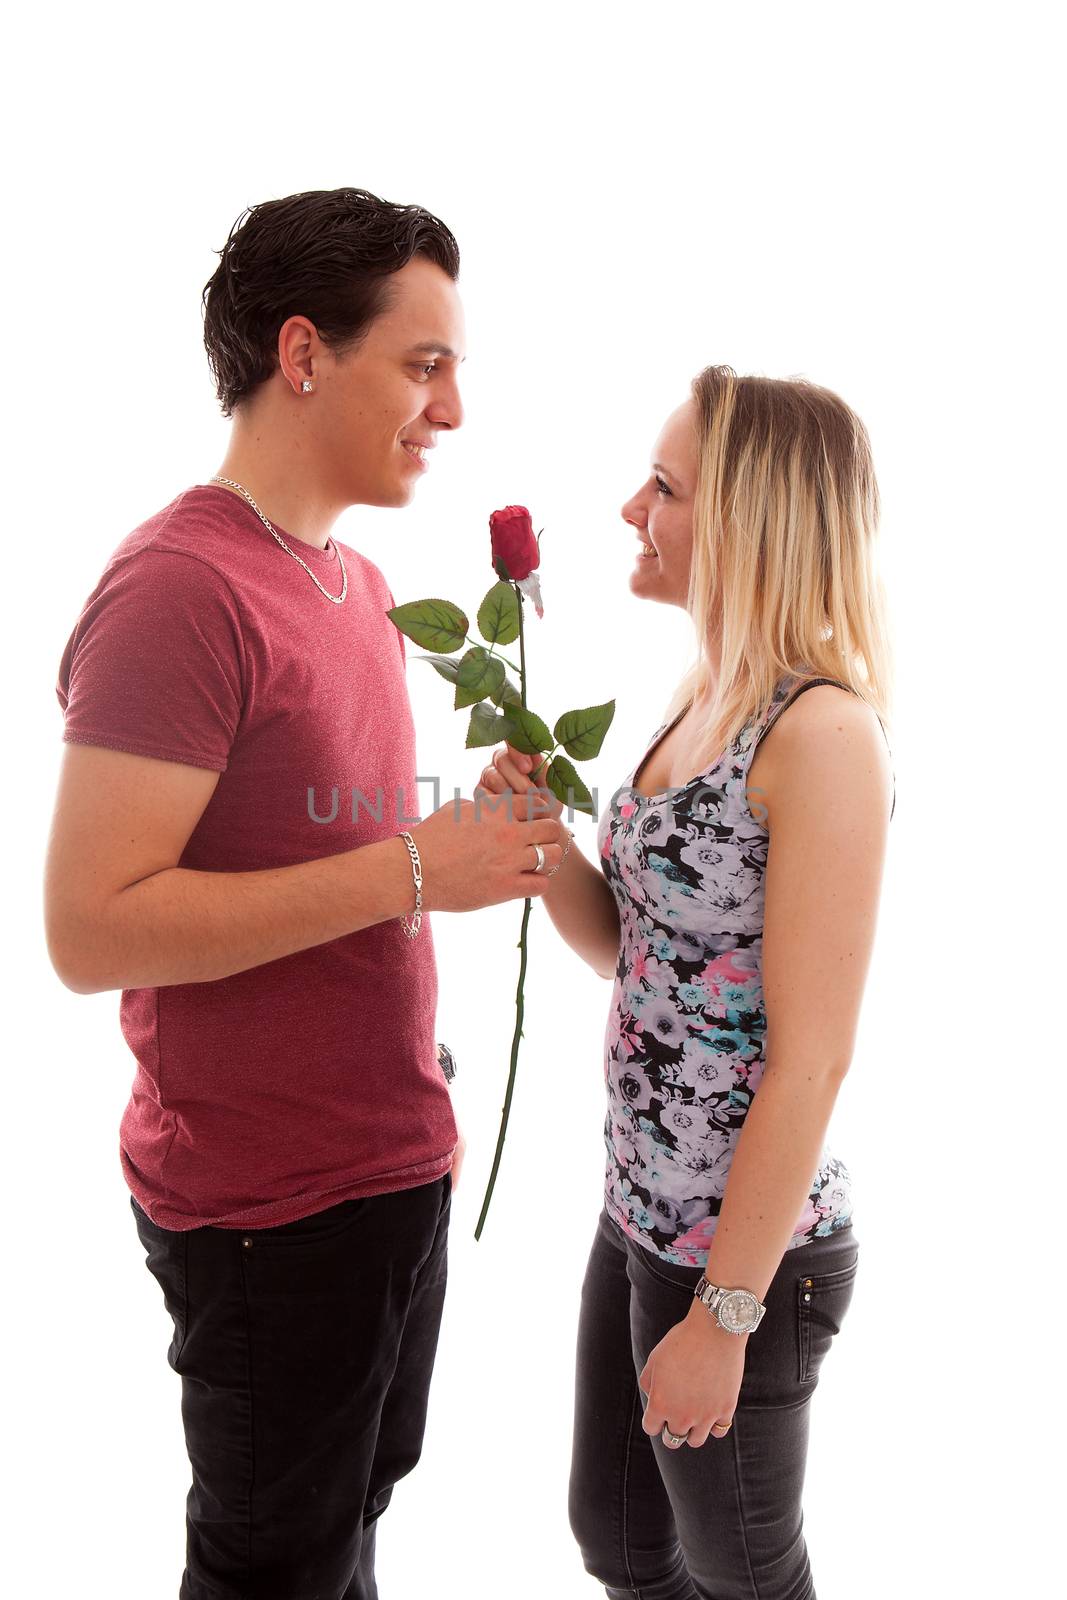 Girl is happy with rose giving by boyfriend over white background